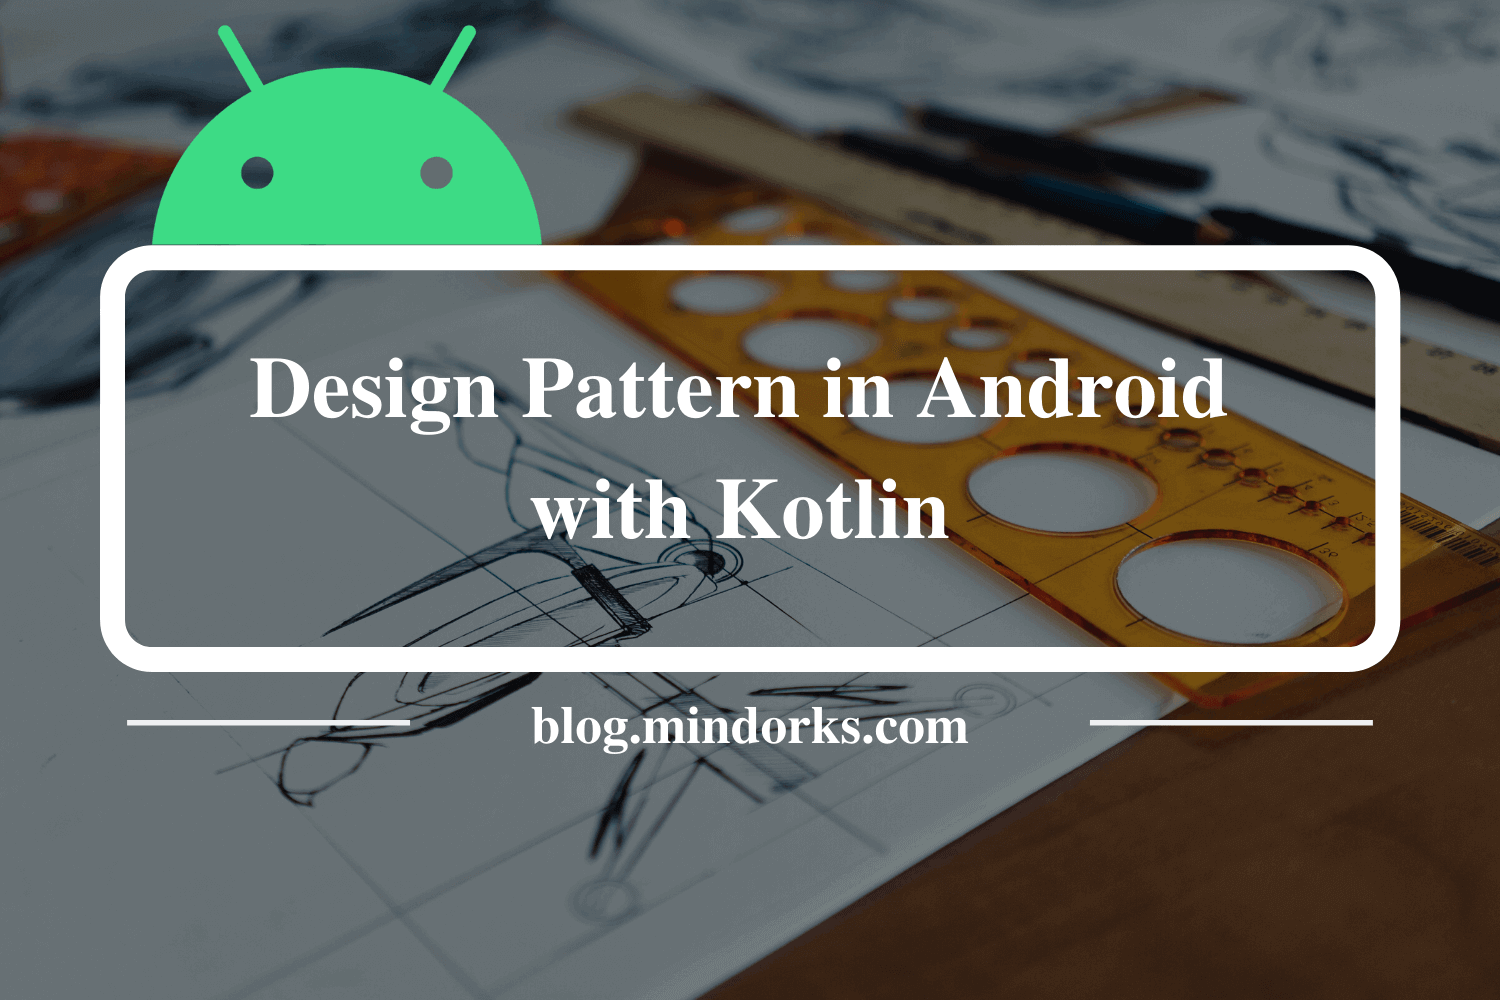 Mastering Design Patterns in Android with Kotlin